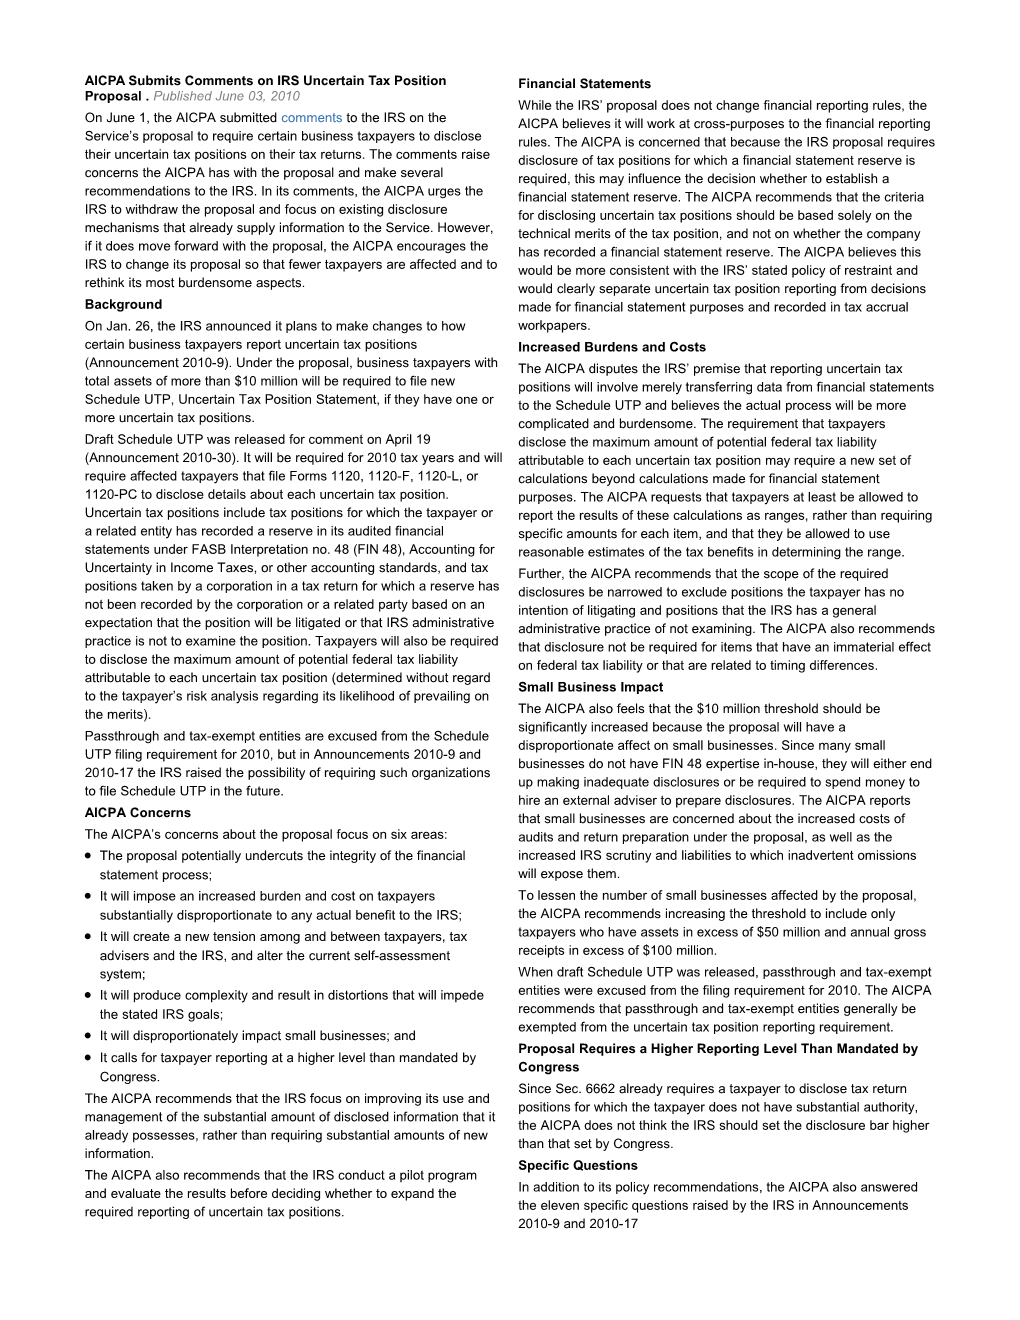 AICPA Submits Comments on IRS Uncertain Tax Position Proposal. Published June 03, 2010